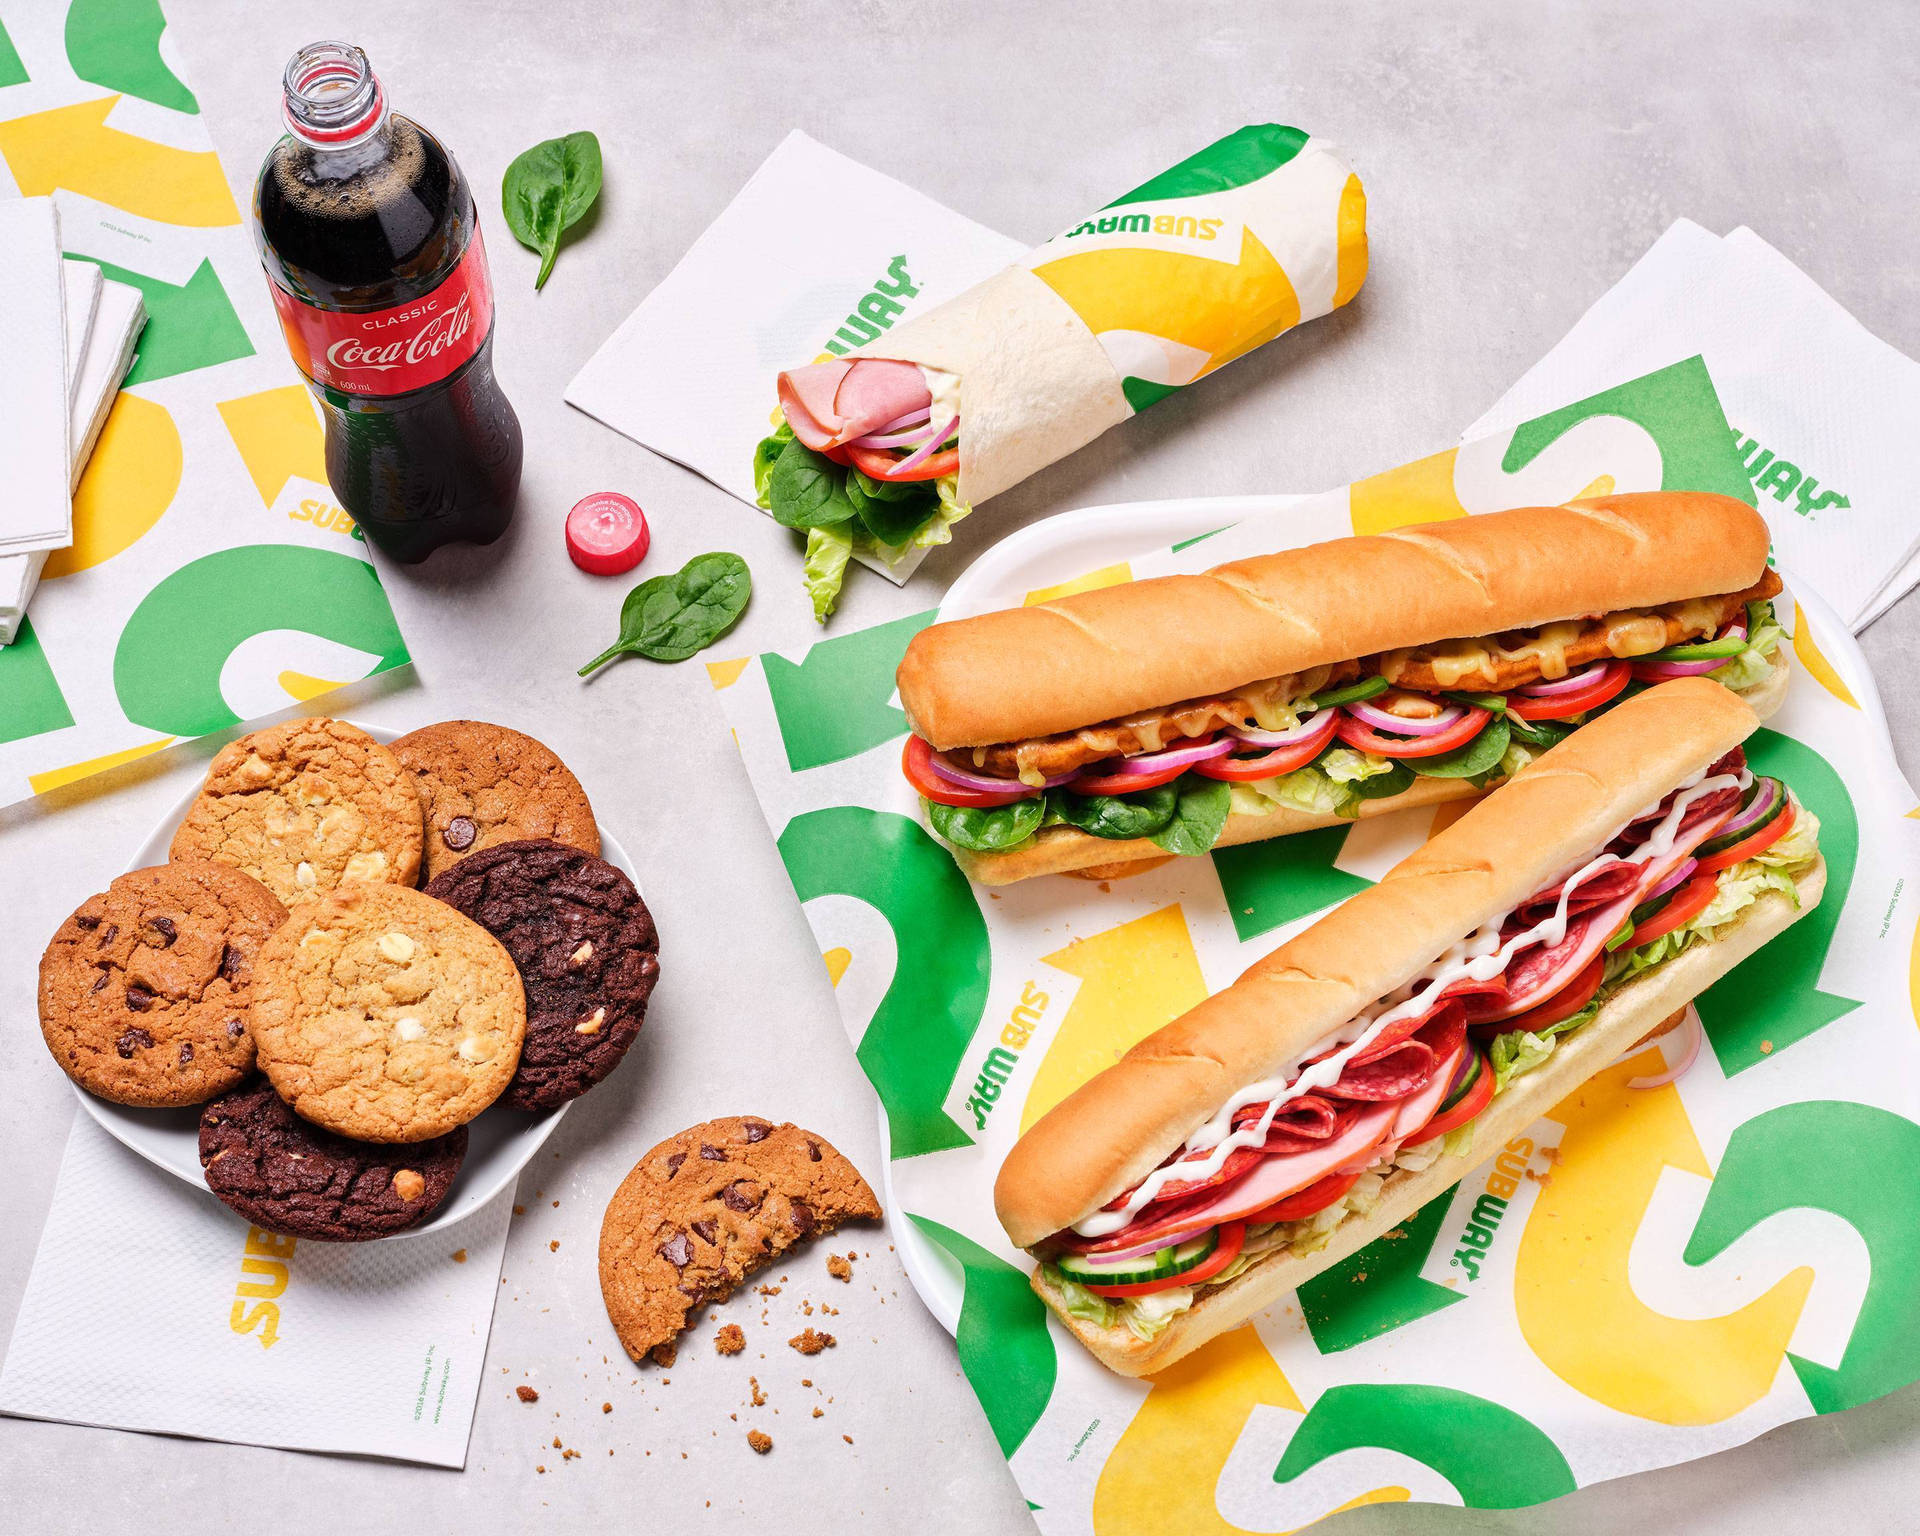 Subway Sandwiches And Cookies